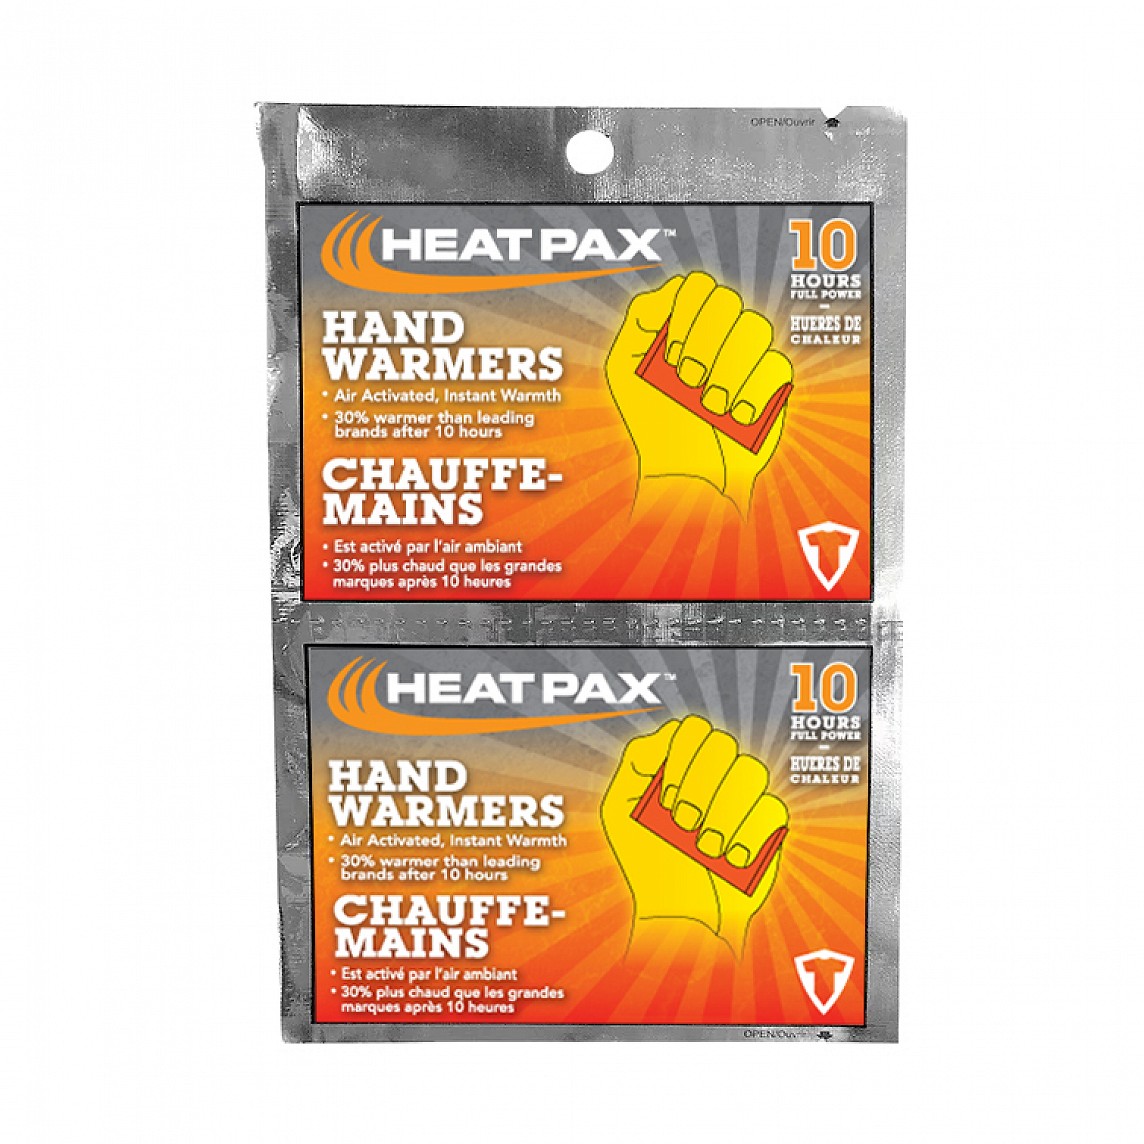 #5550 Techniche Air Activated Heat Pax Hand Warmers